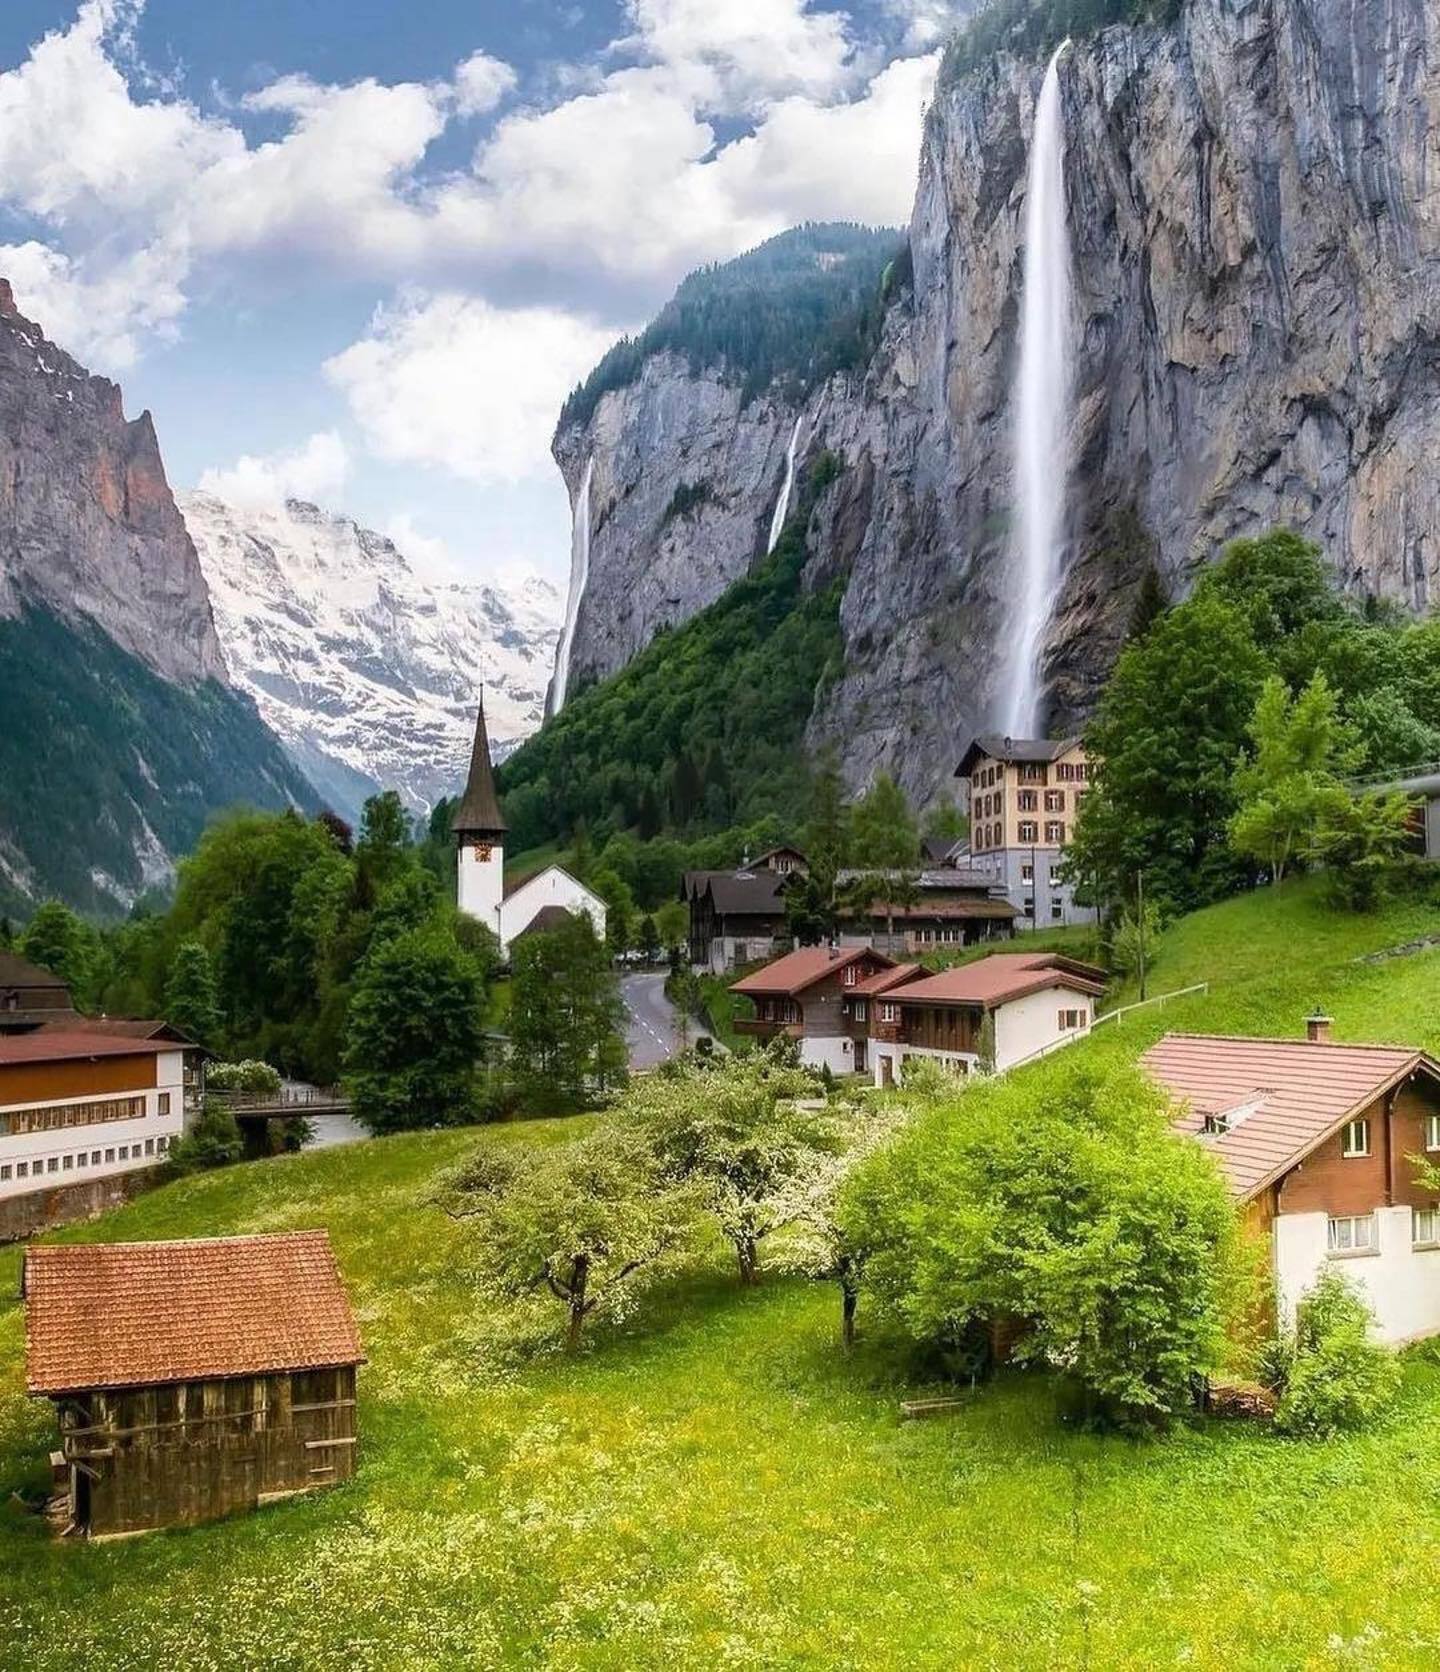 We're going to Switzerland: when low prices, great weather, and a fairytale landscape